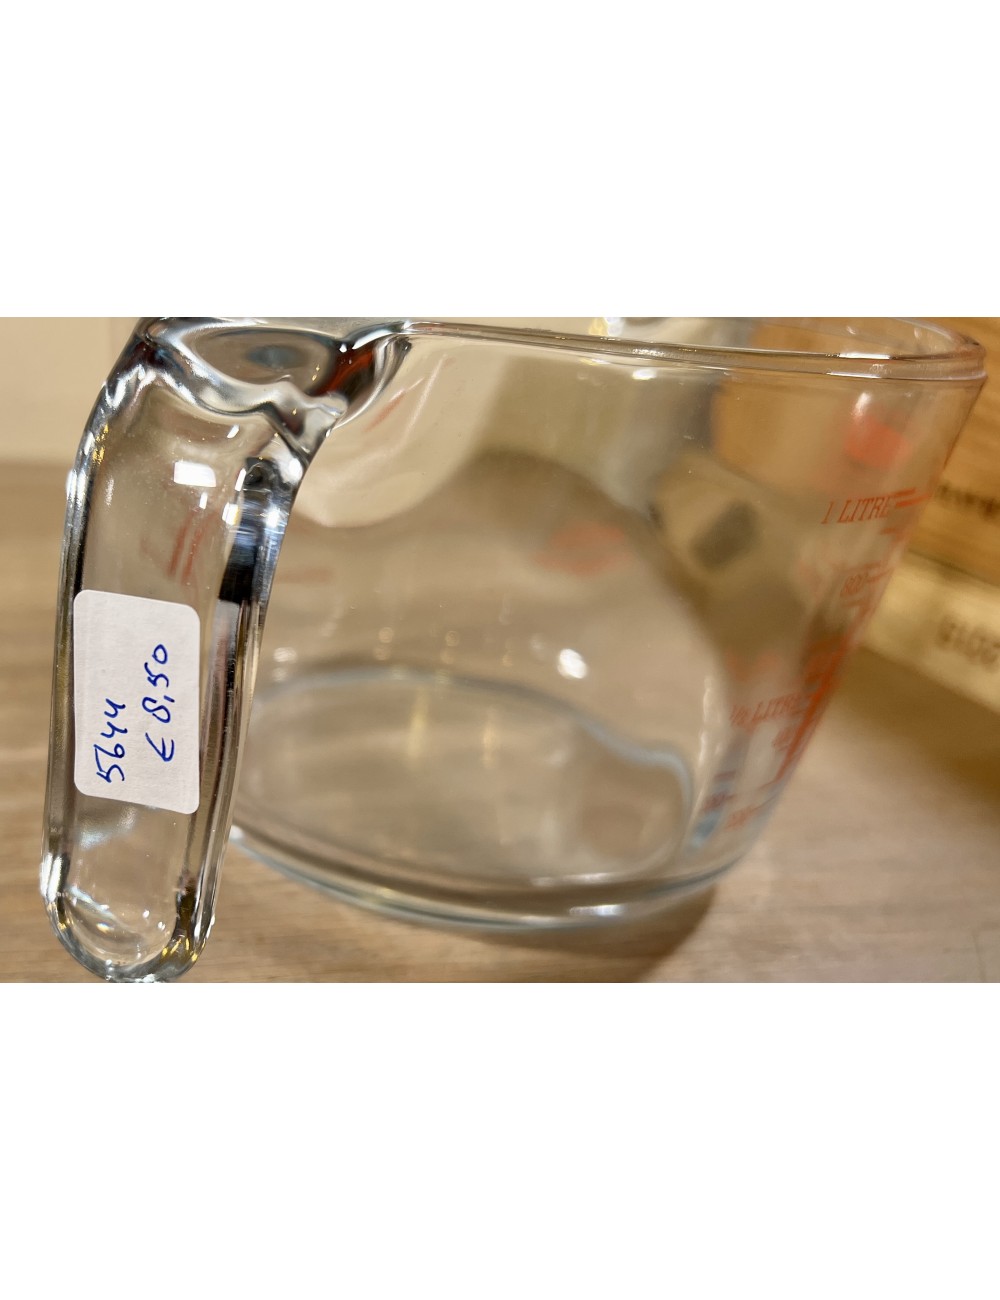 https://www.ramblingrose.nl/14519-large_default/measuring-cup-pyrex-thick-glass-model-with-size-markings.jpg